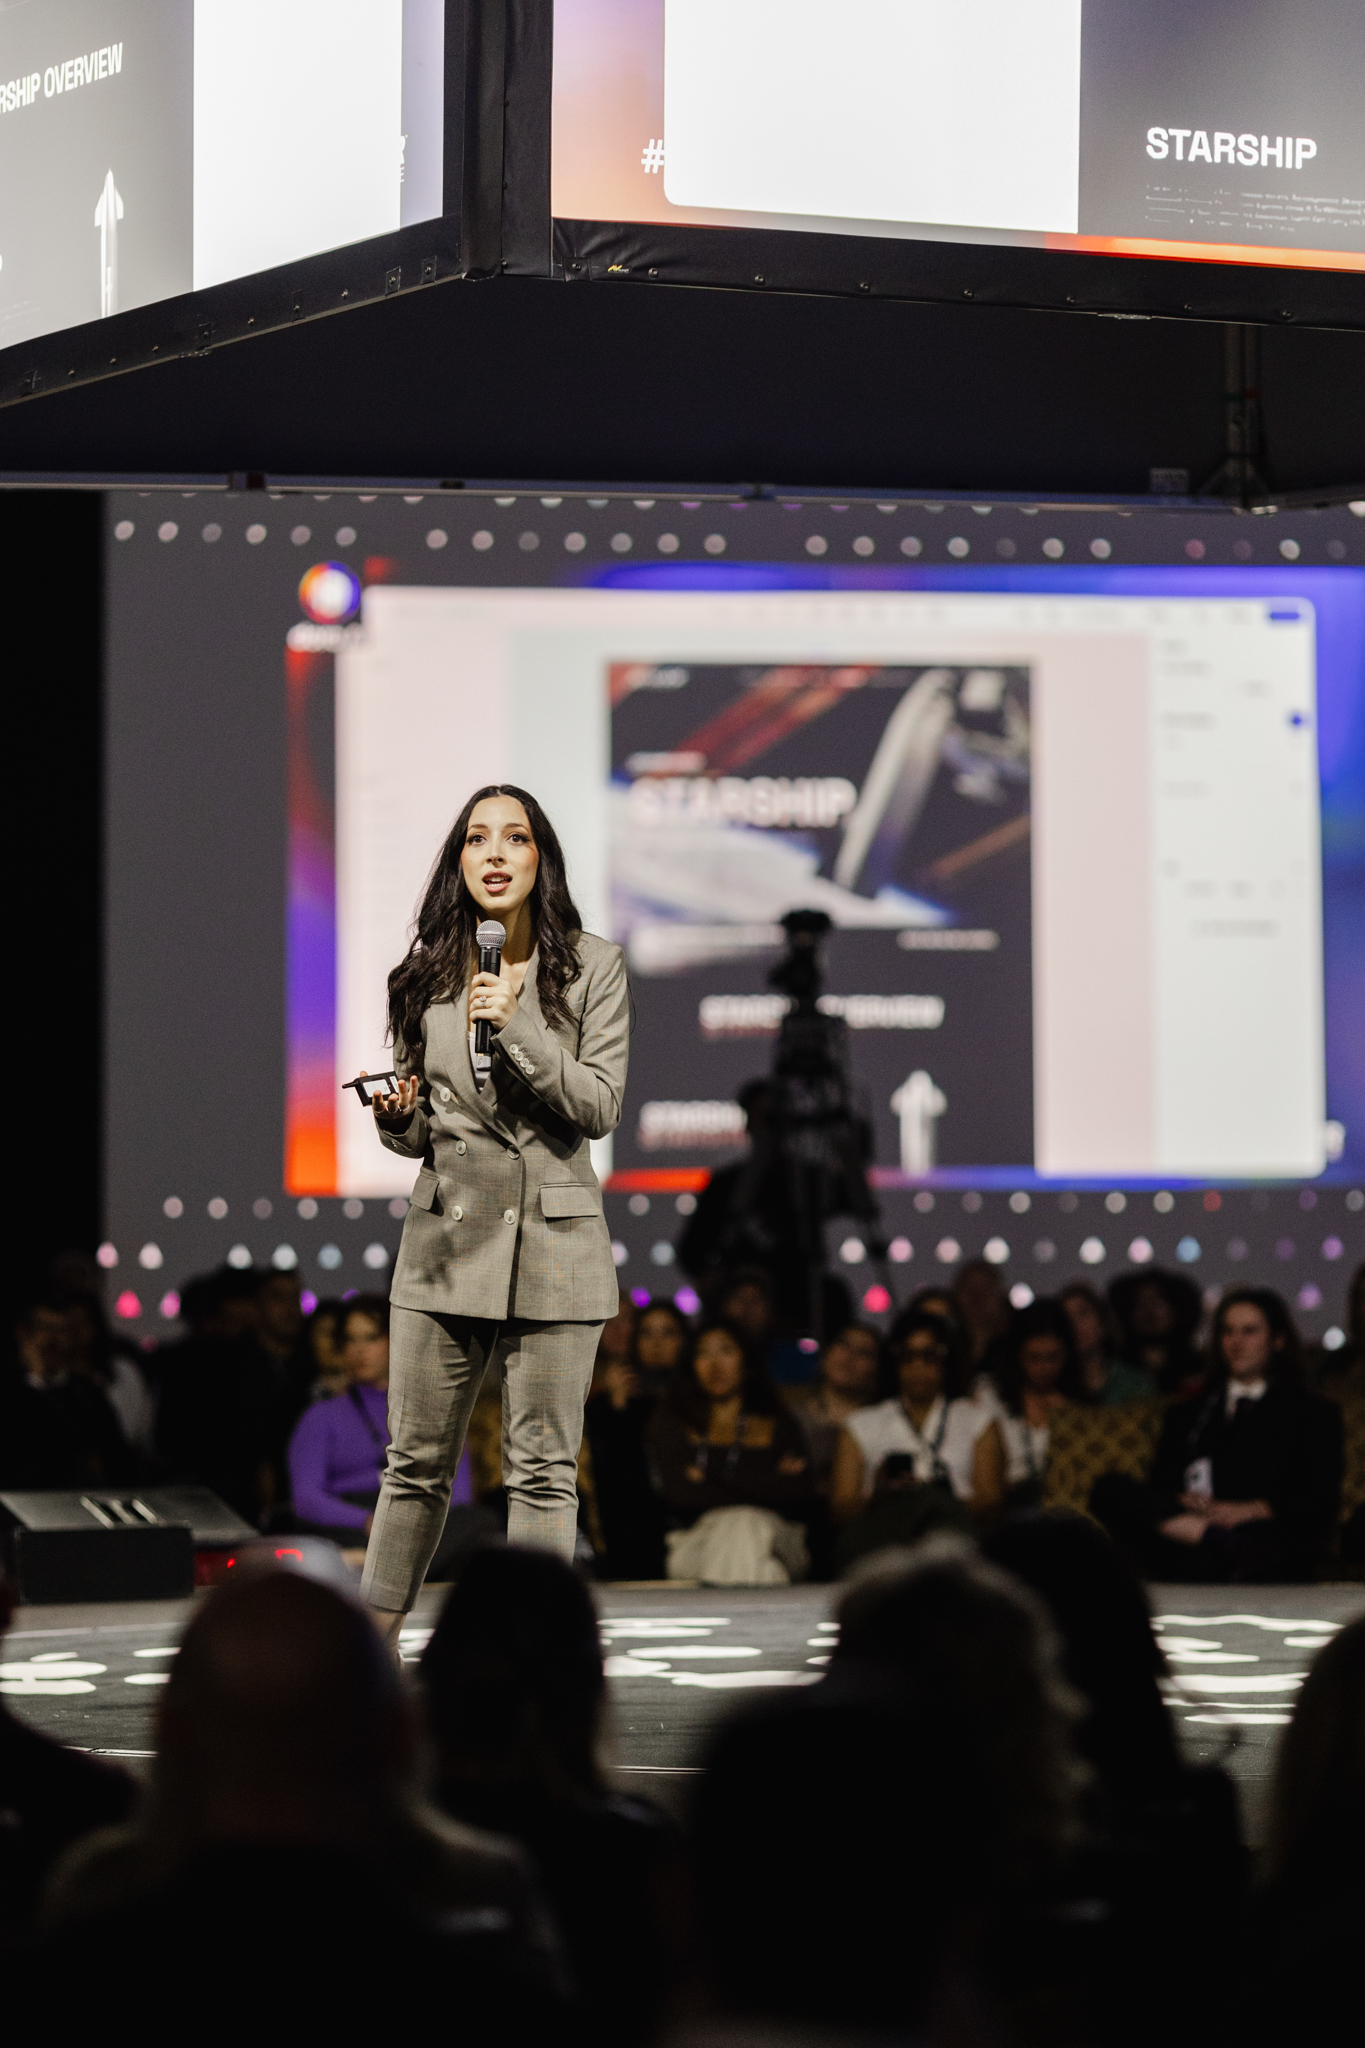 A woman giving a presentation on stage at an event. The moment is captured beautifully through event photography.